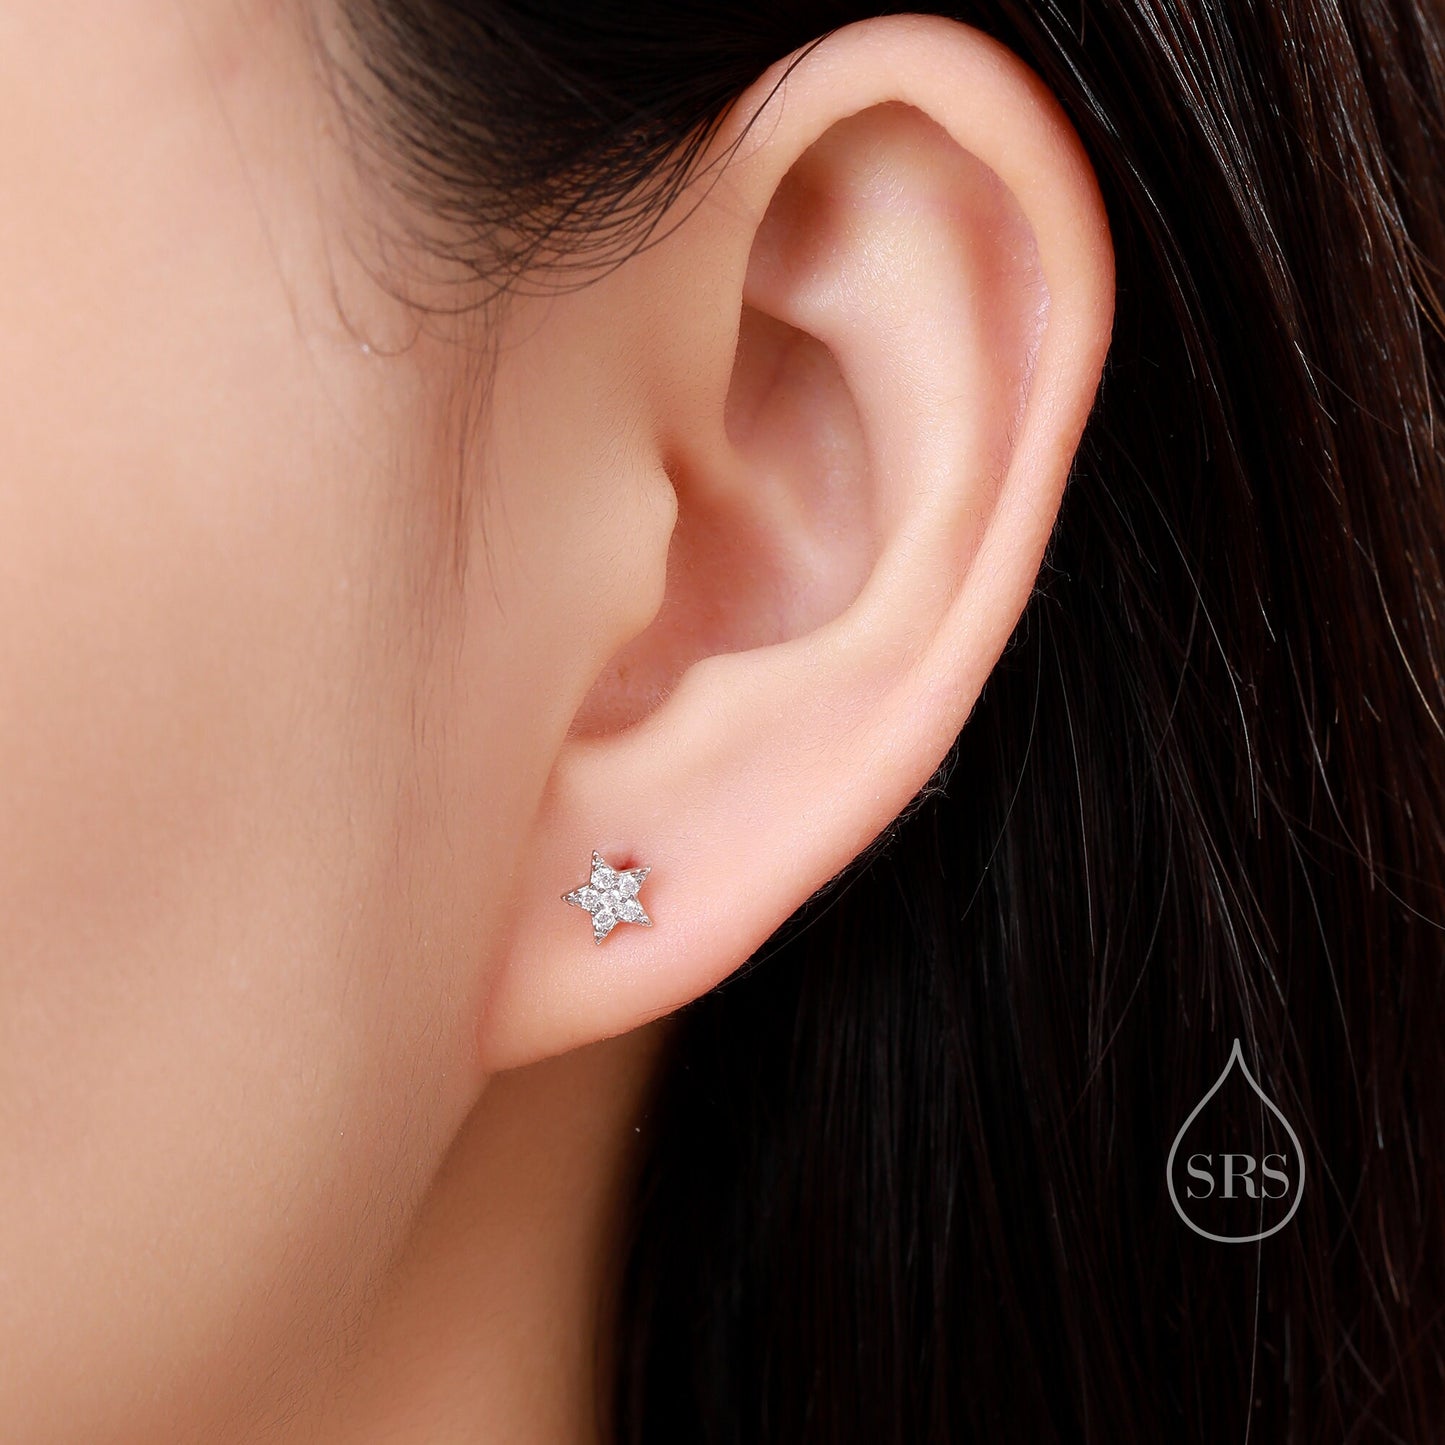 Extra Tiny CZ Star Stud Earrings in Sterling Silver, Silver, Gold or Rose Gold, Star Earrings, Tiny Star Earrings